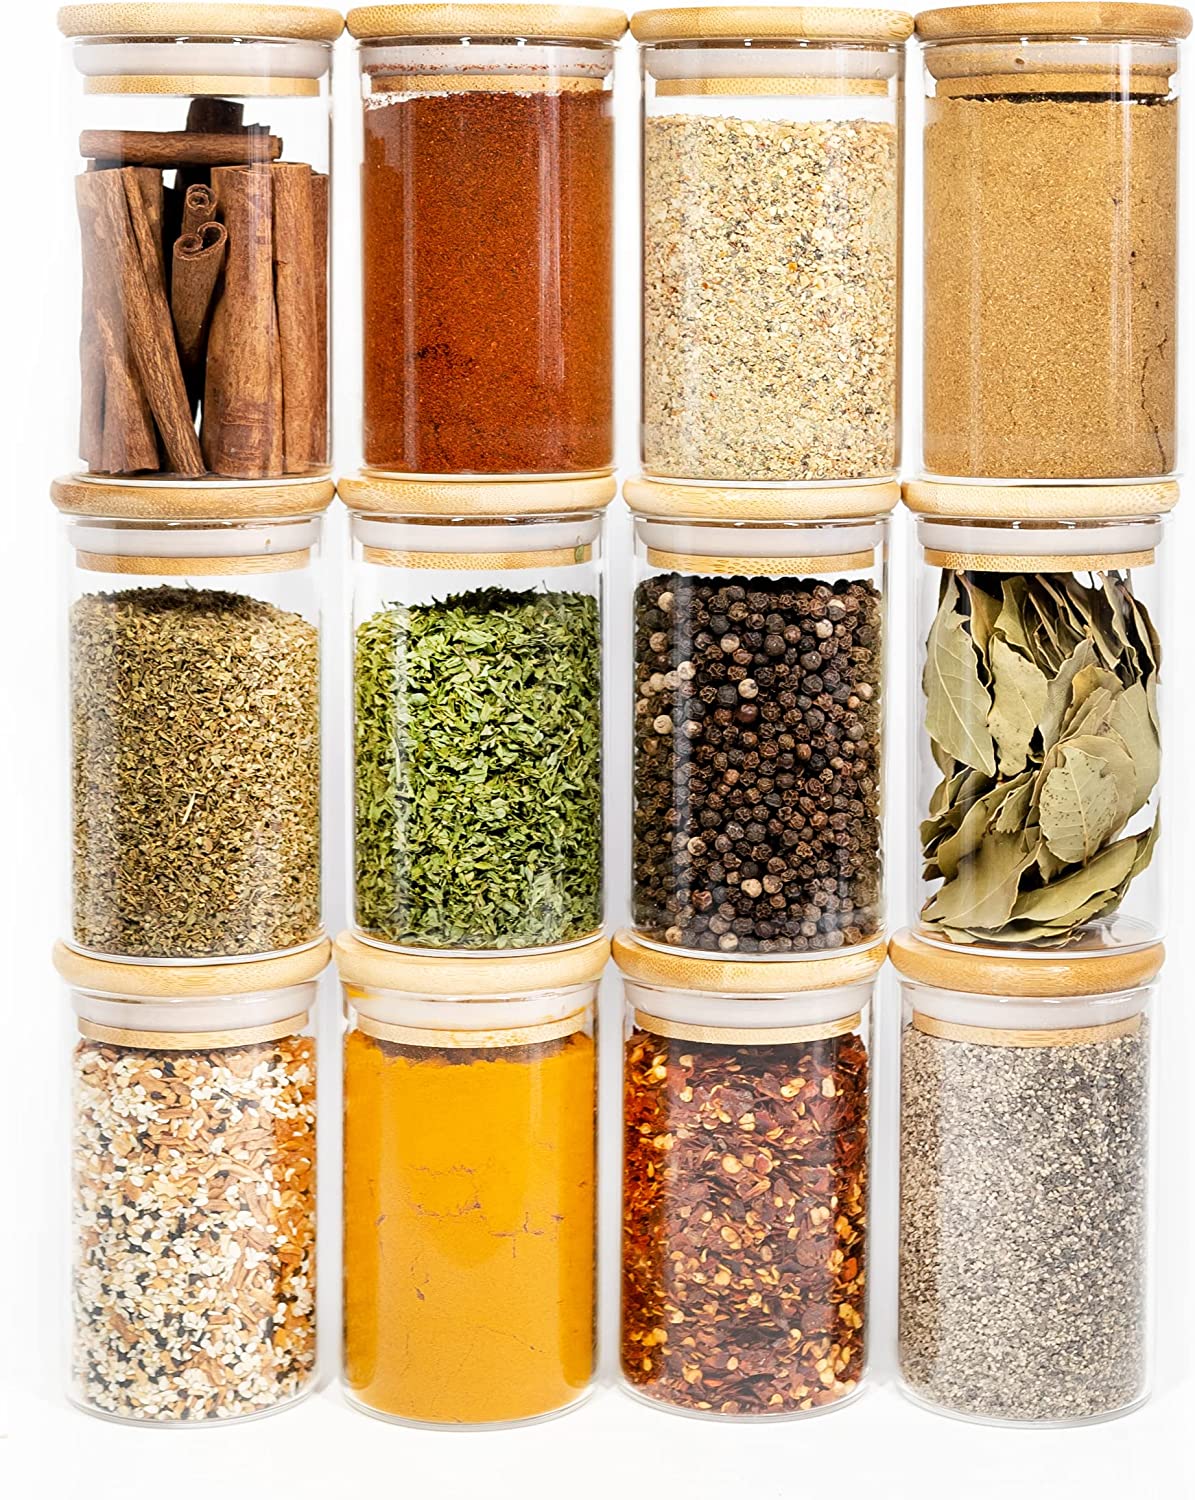 Best Deal for FINESSY Spice Jars with Label Organizer, 36 Seasoning